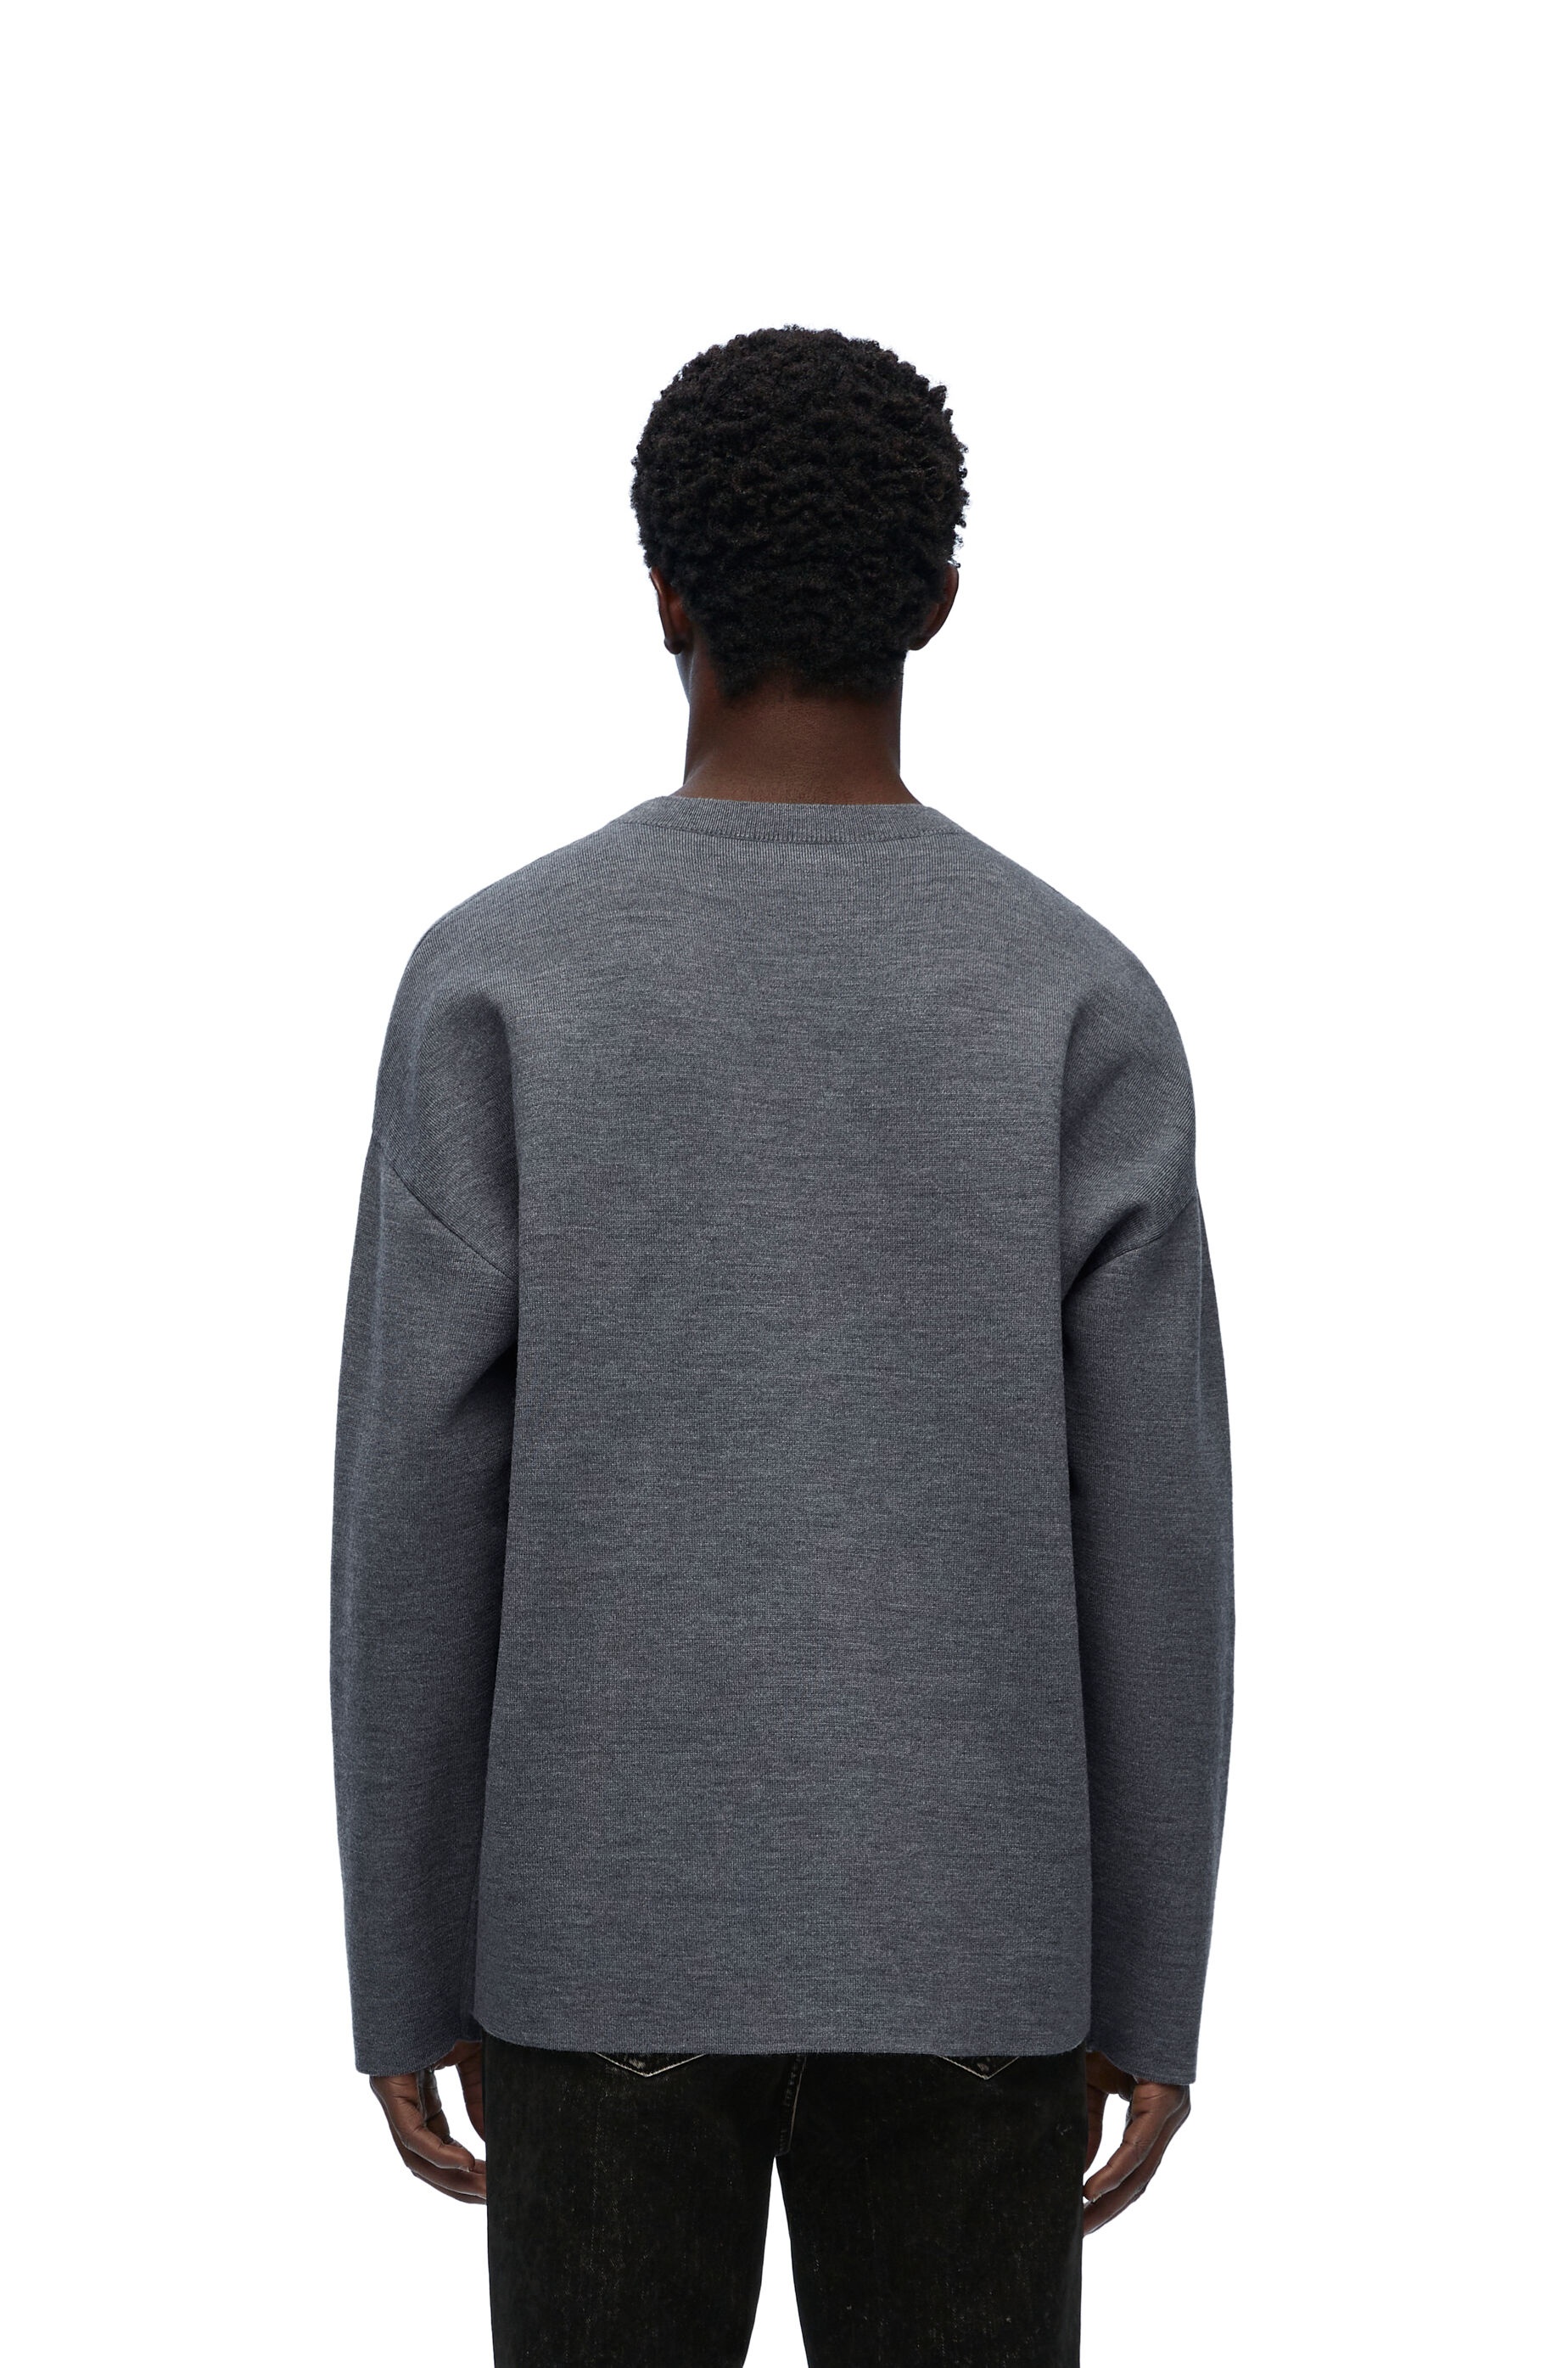 Anagram sweater in wool - 4